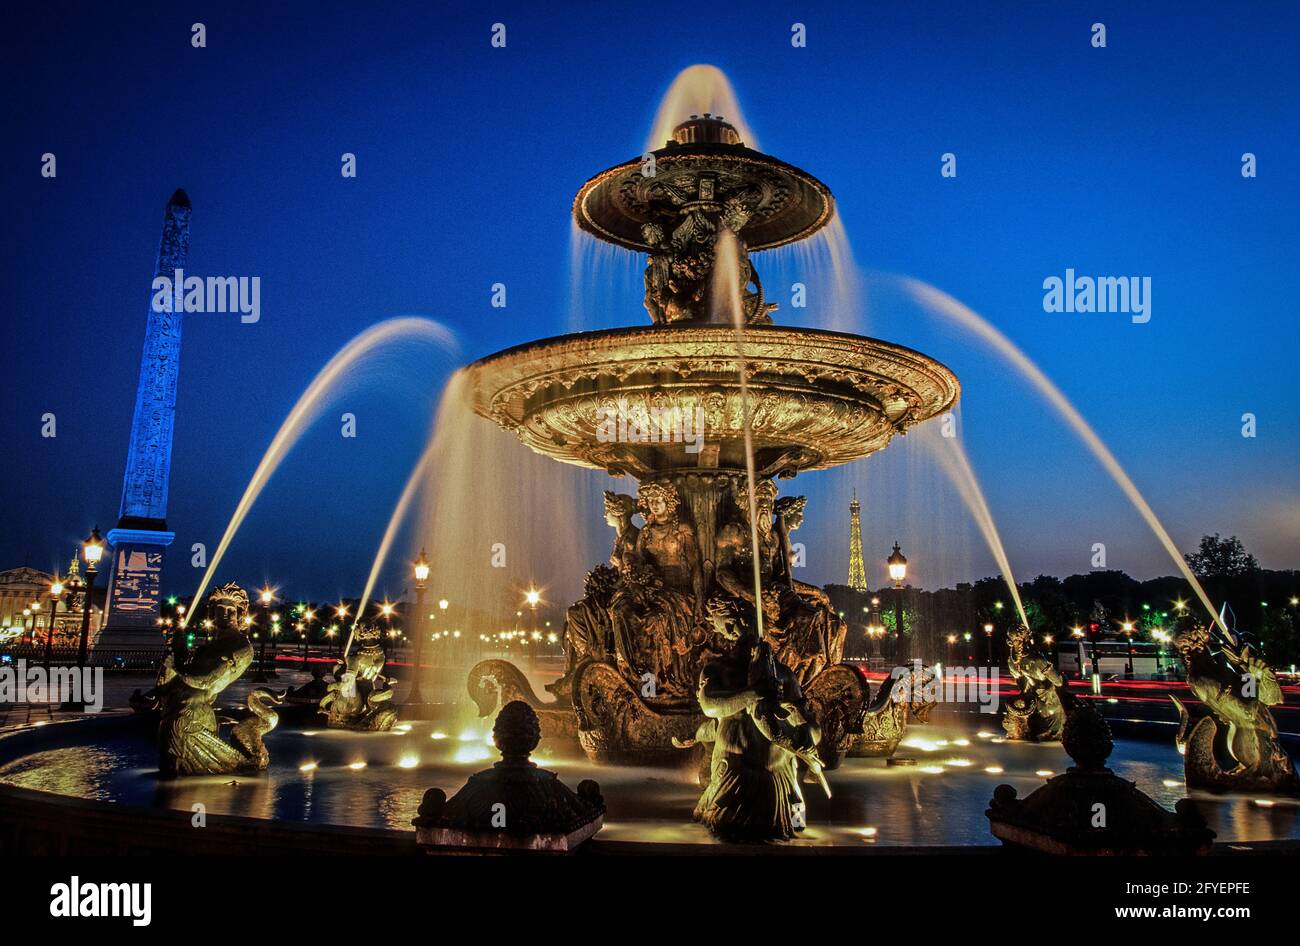 FRANCE. PARIS (75) PLACE DE LA CONCORDE. THE FOUNTAIN OF THE RIVERS AT NIGHT. THE OBELISK ILLUMINATED IN 'BLEU KLEIN', THE EIFFEL TOWER, IN THE BACKGR Stock Photo